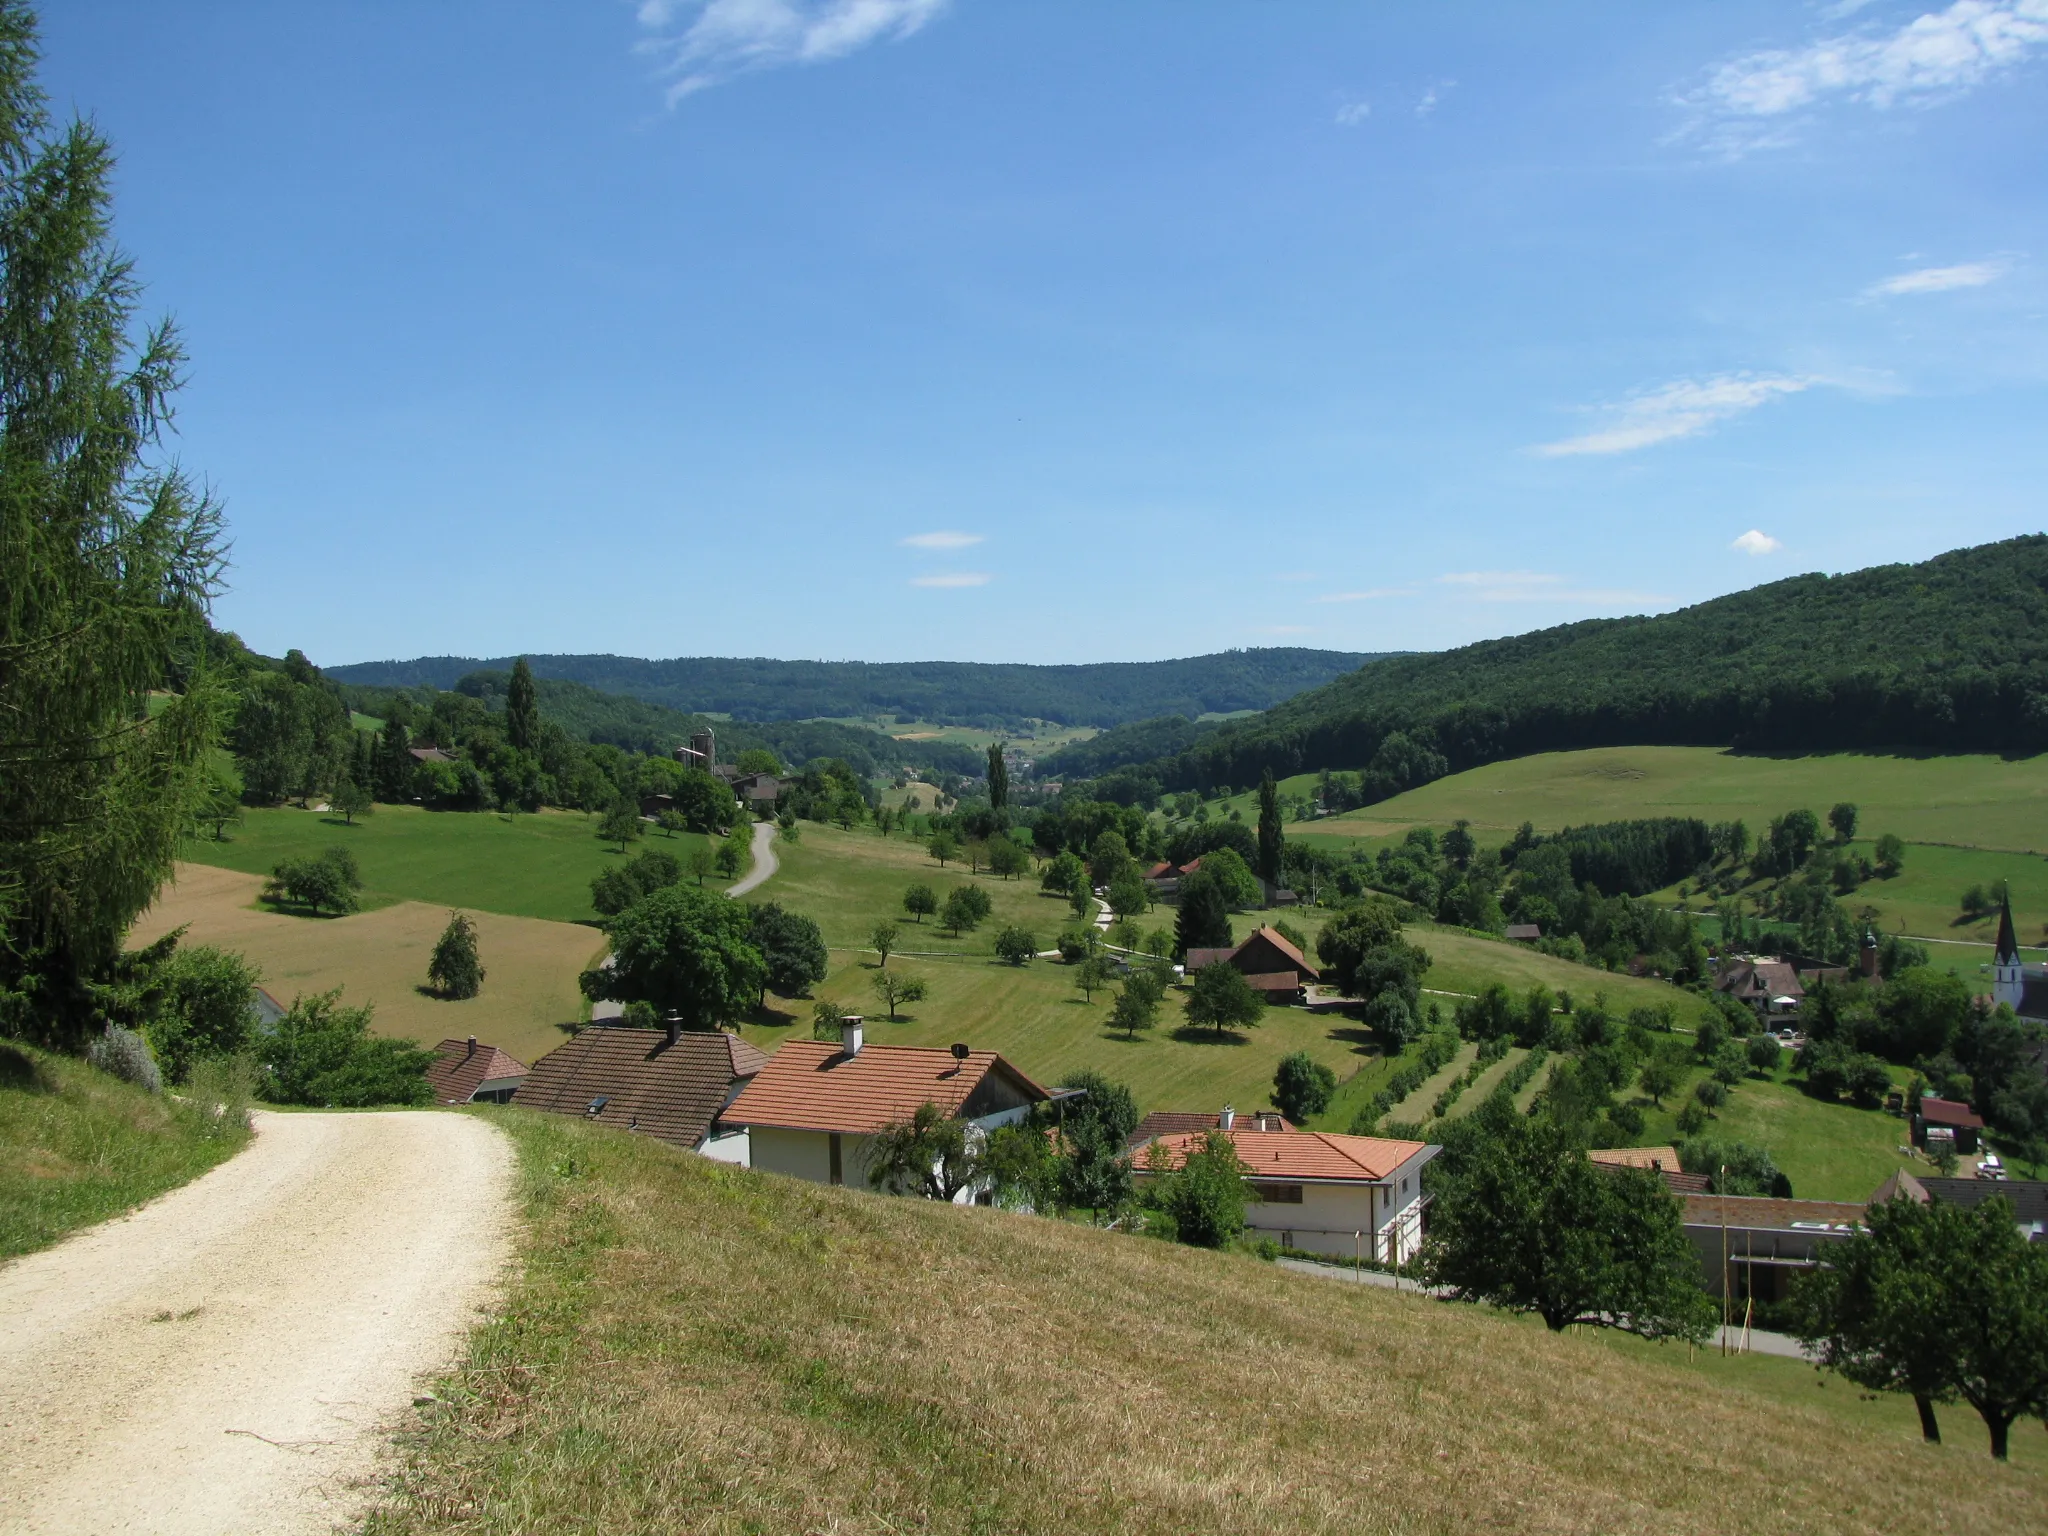 Photo showing: The valley "Möhlintal" at Zuzgen